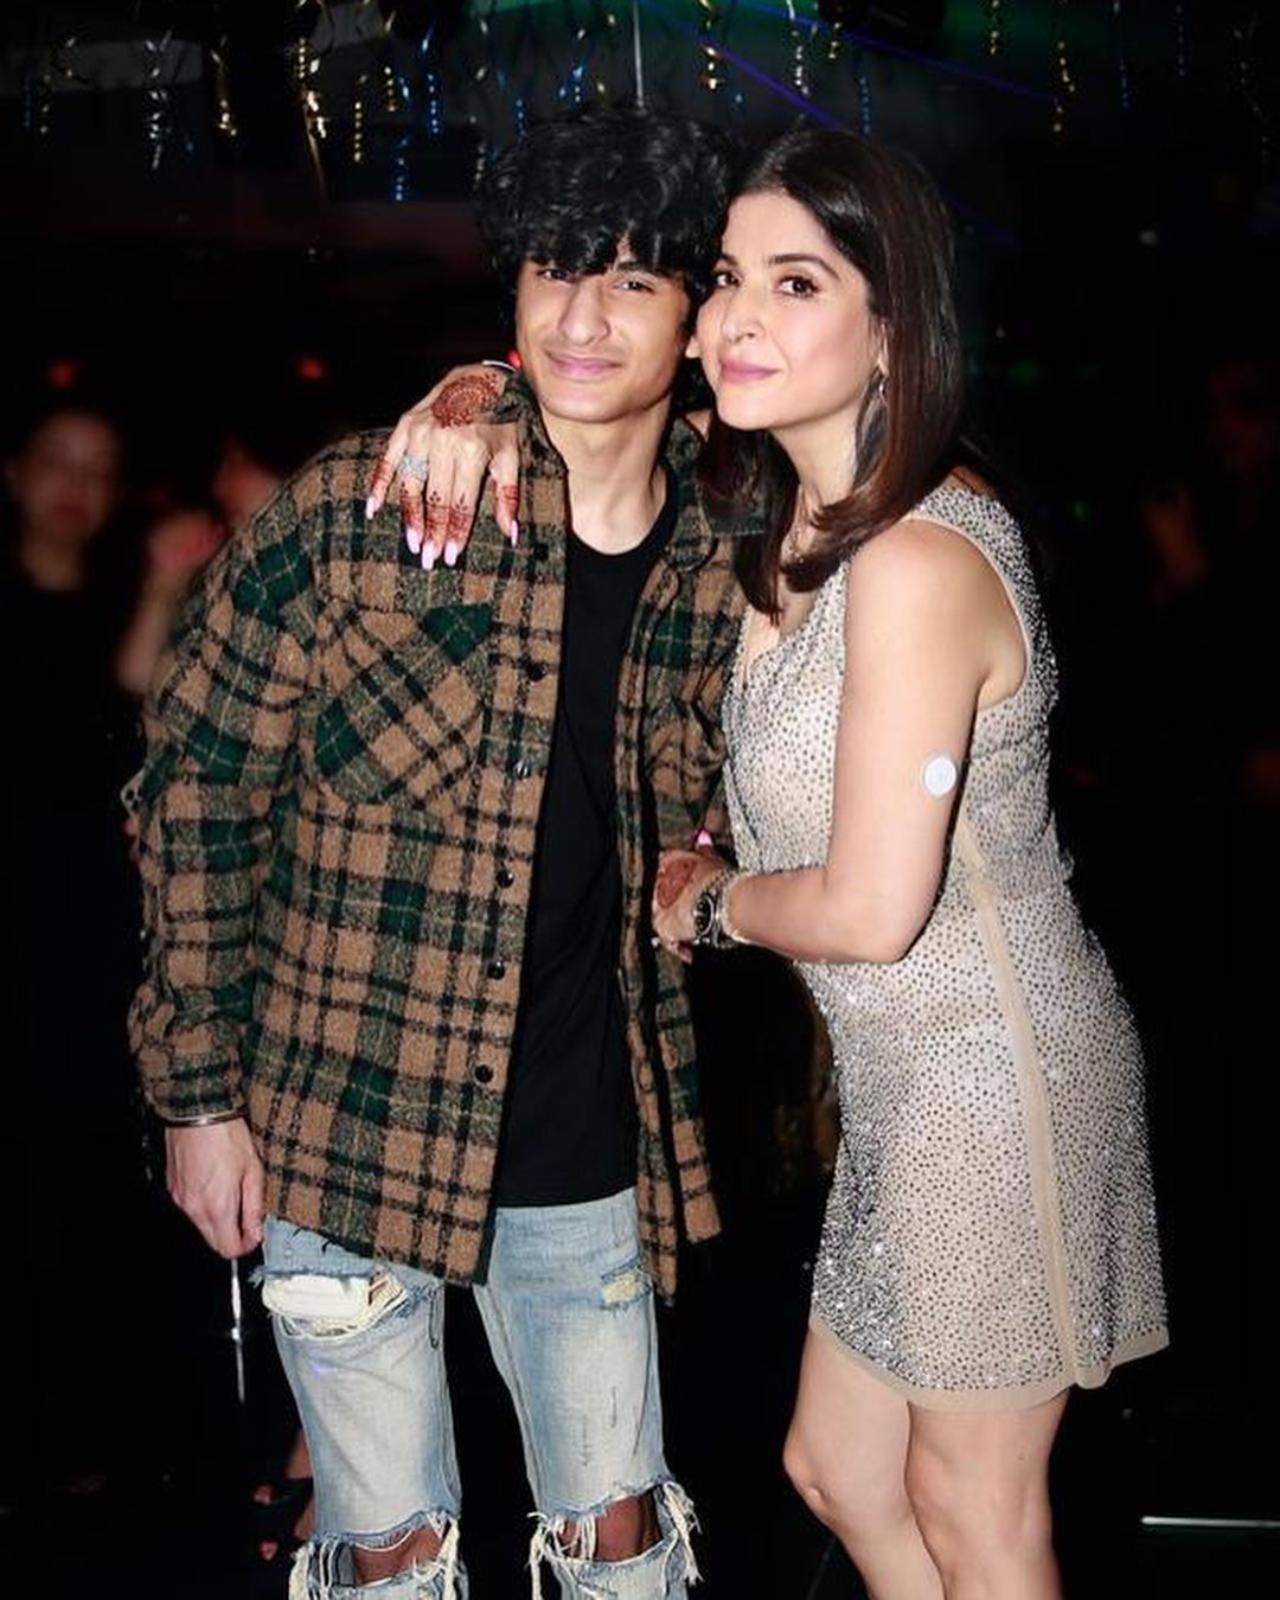 In one of the images, Maheep was seen posing with her son Jahaan. On the show, Fabulous Lives of Bollywood Wives season 1, Maheep and Arjun Kapoor had hinted at Jahaan joining the movie business once he completes his education 